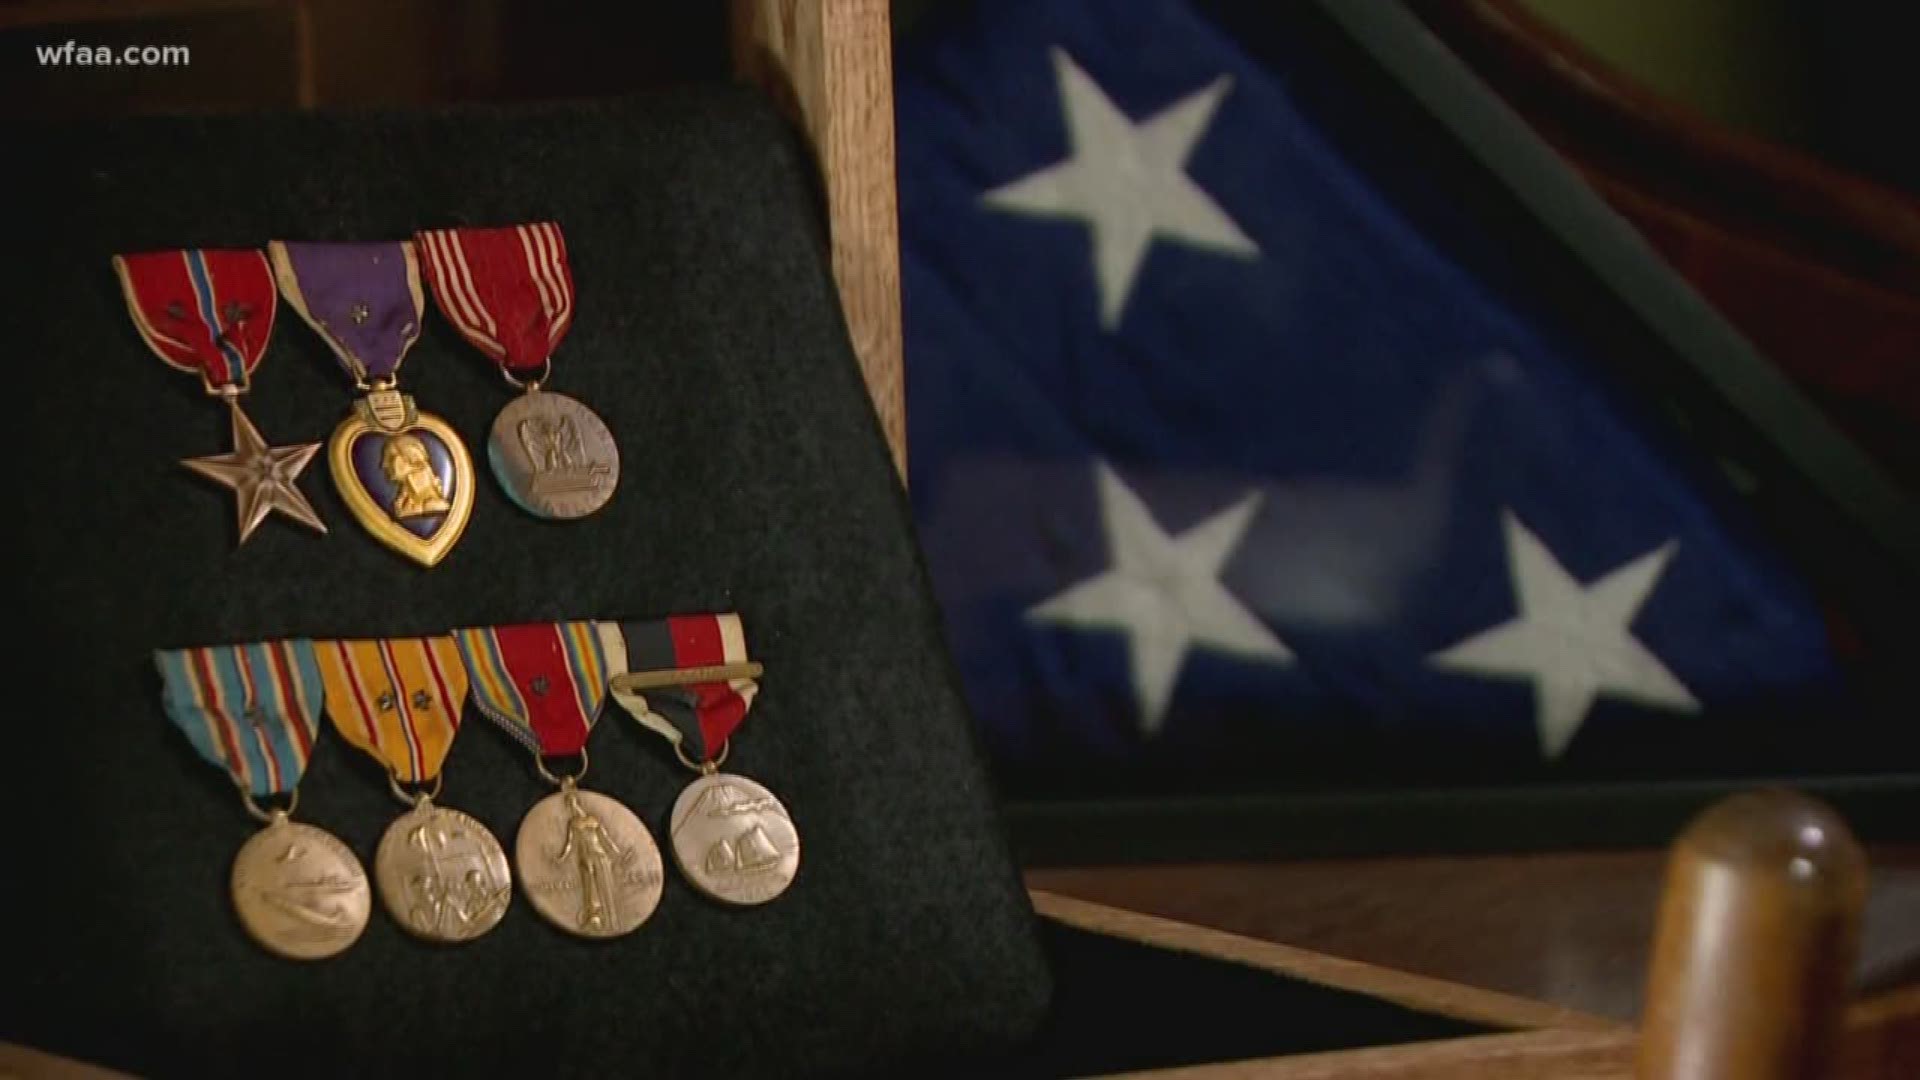 "I was like guys, this says World War II medals on it,"  Sgt. Paige Dobyns recalled. "I pull out the Purple Heart and the Bronze Star and I was like, oh my gosh!"